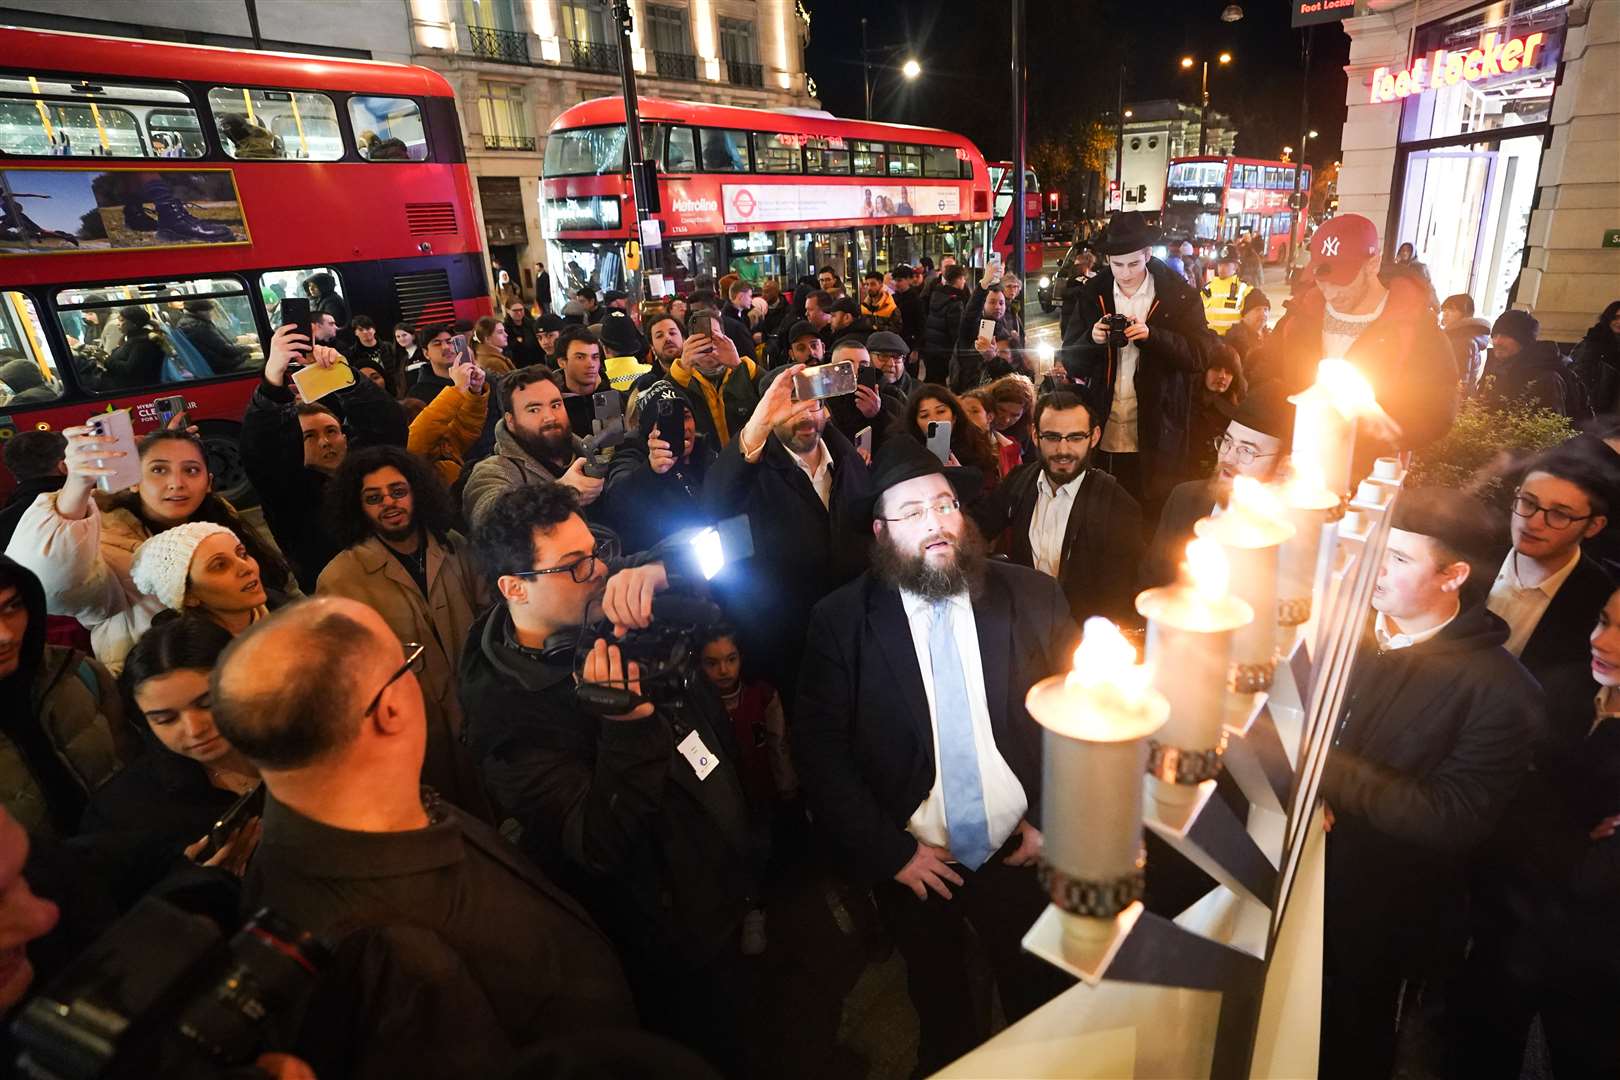 Members of the Jewish community light candles on Oxford Street in London on the anniversary of the attack (James Manning/PA)